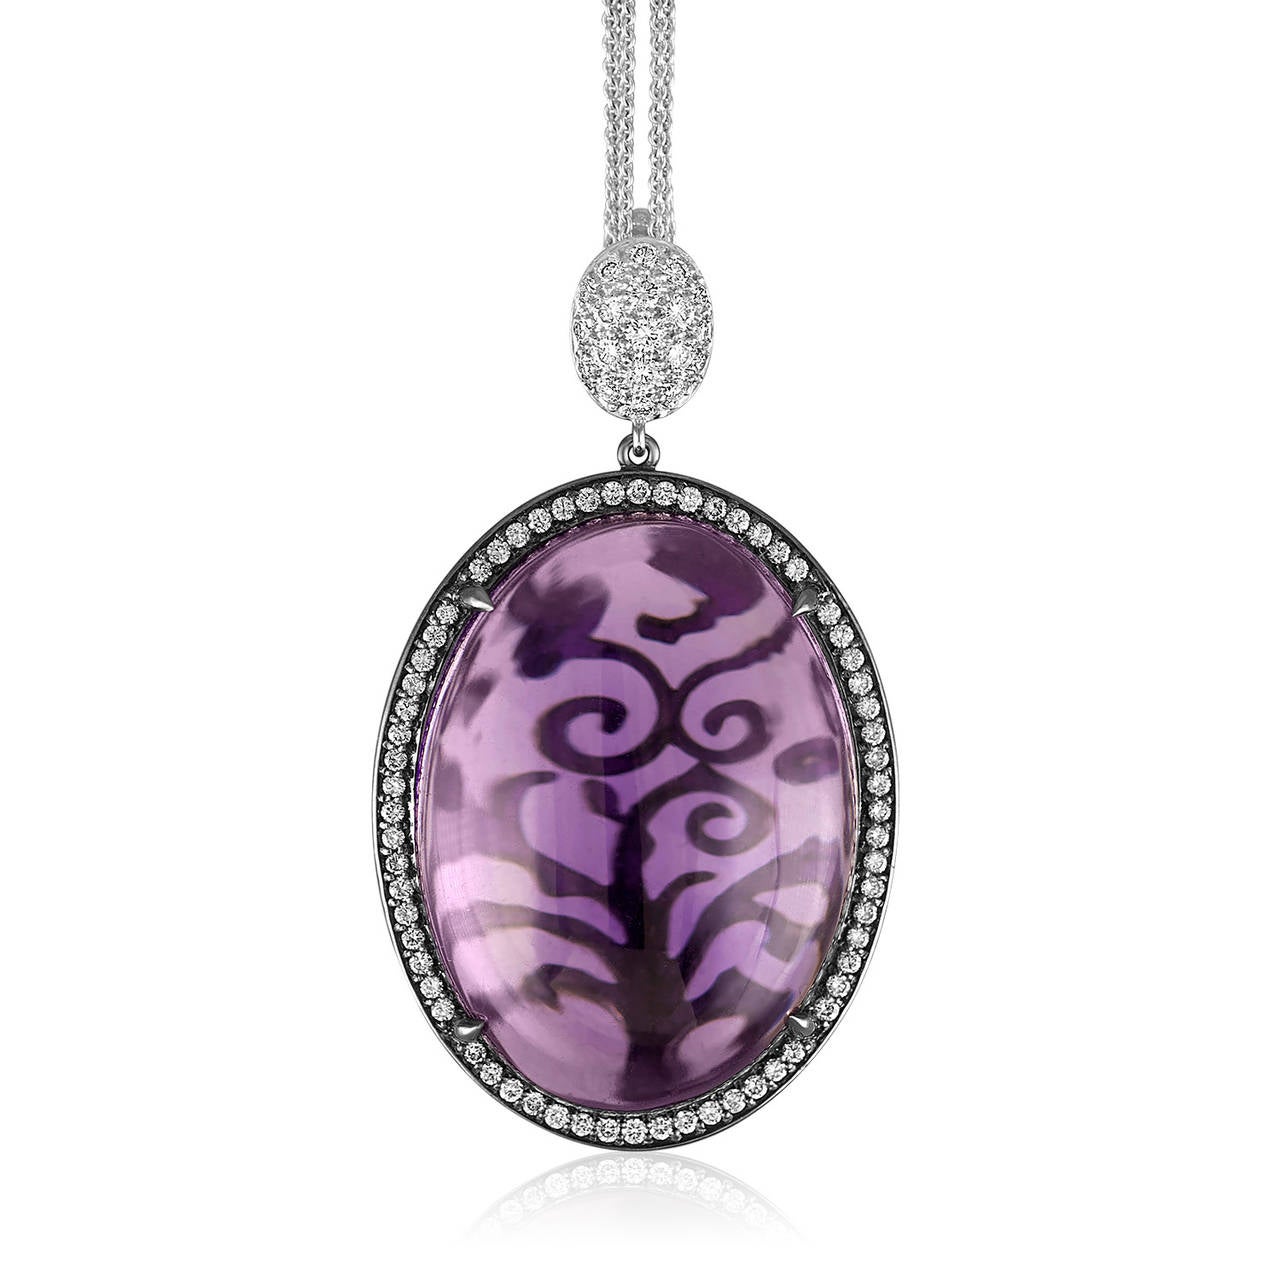 Amethyst Cabochon set in 18K White Gold.
The bail is PLT950 covered in diamonds
Beautiful Scroll Pattern can be seen through the Amethyst Stone.
Comes with 16